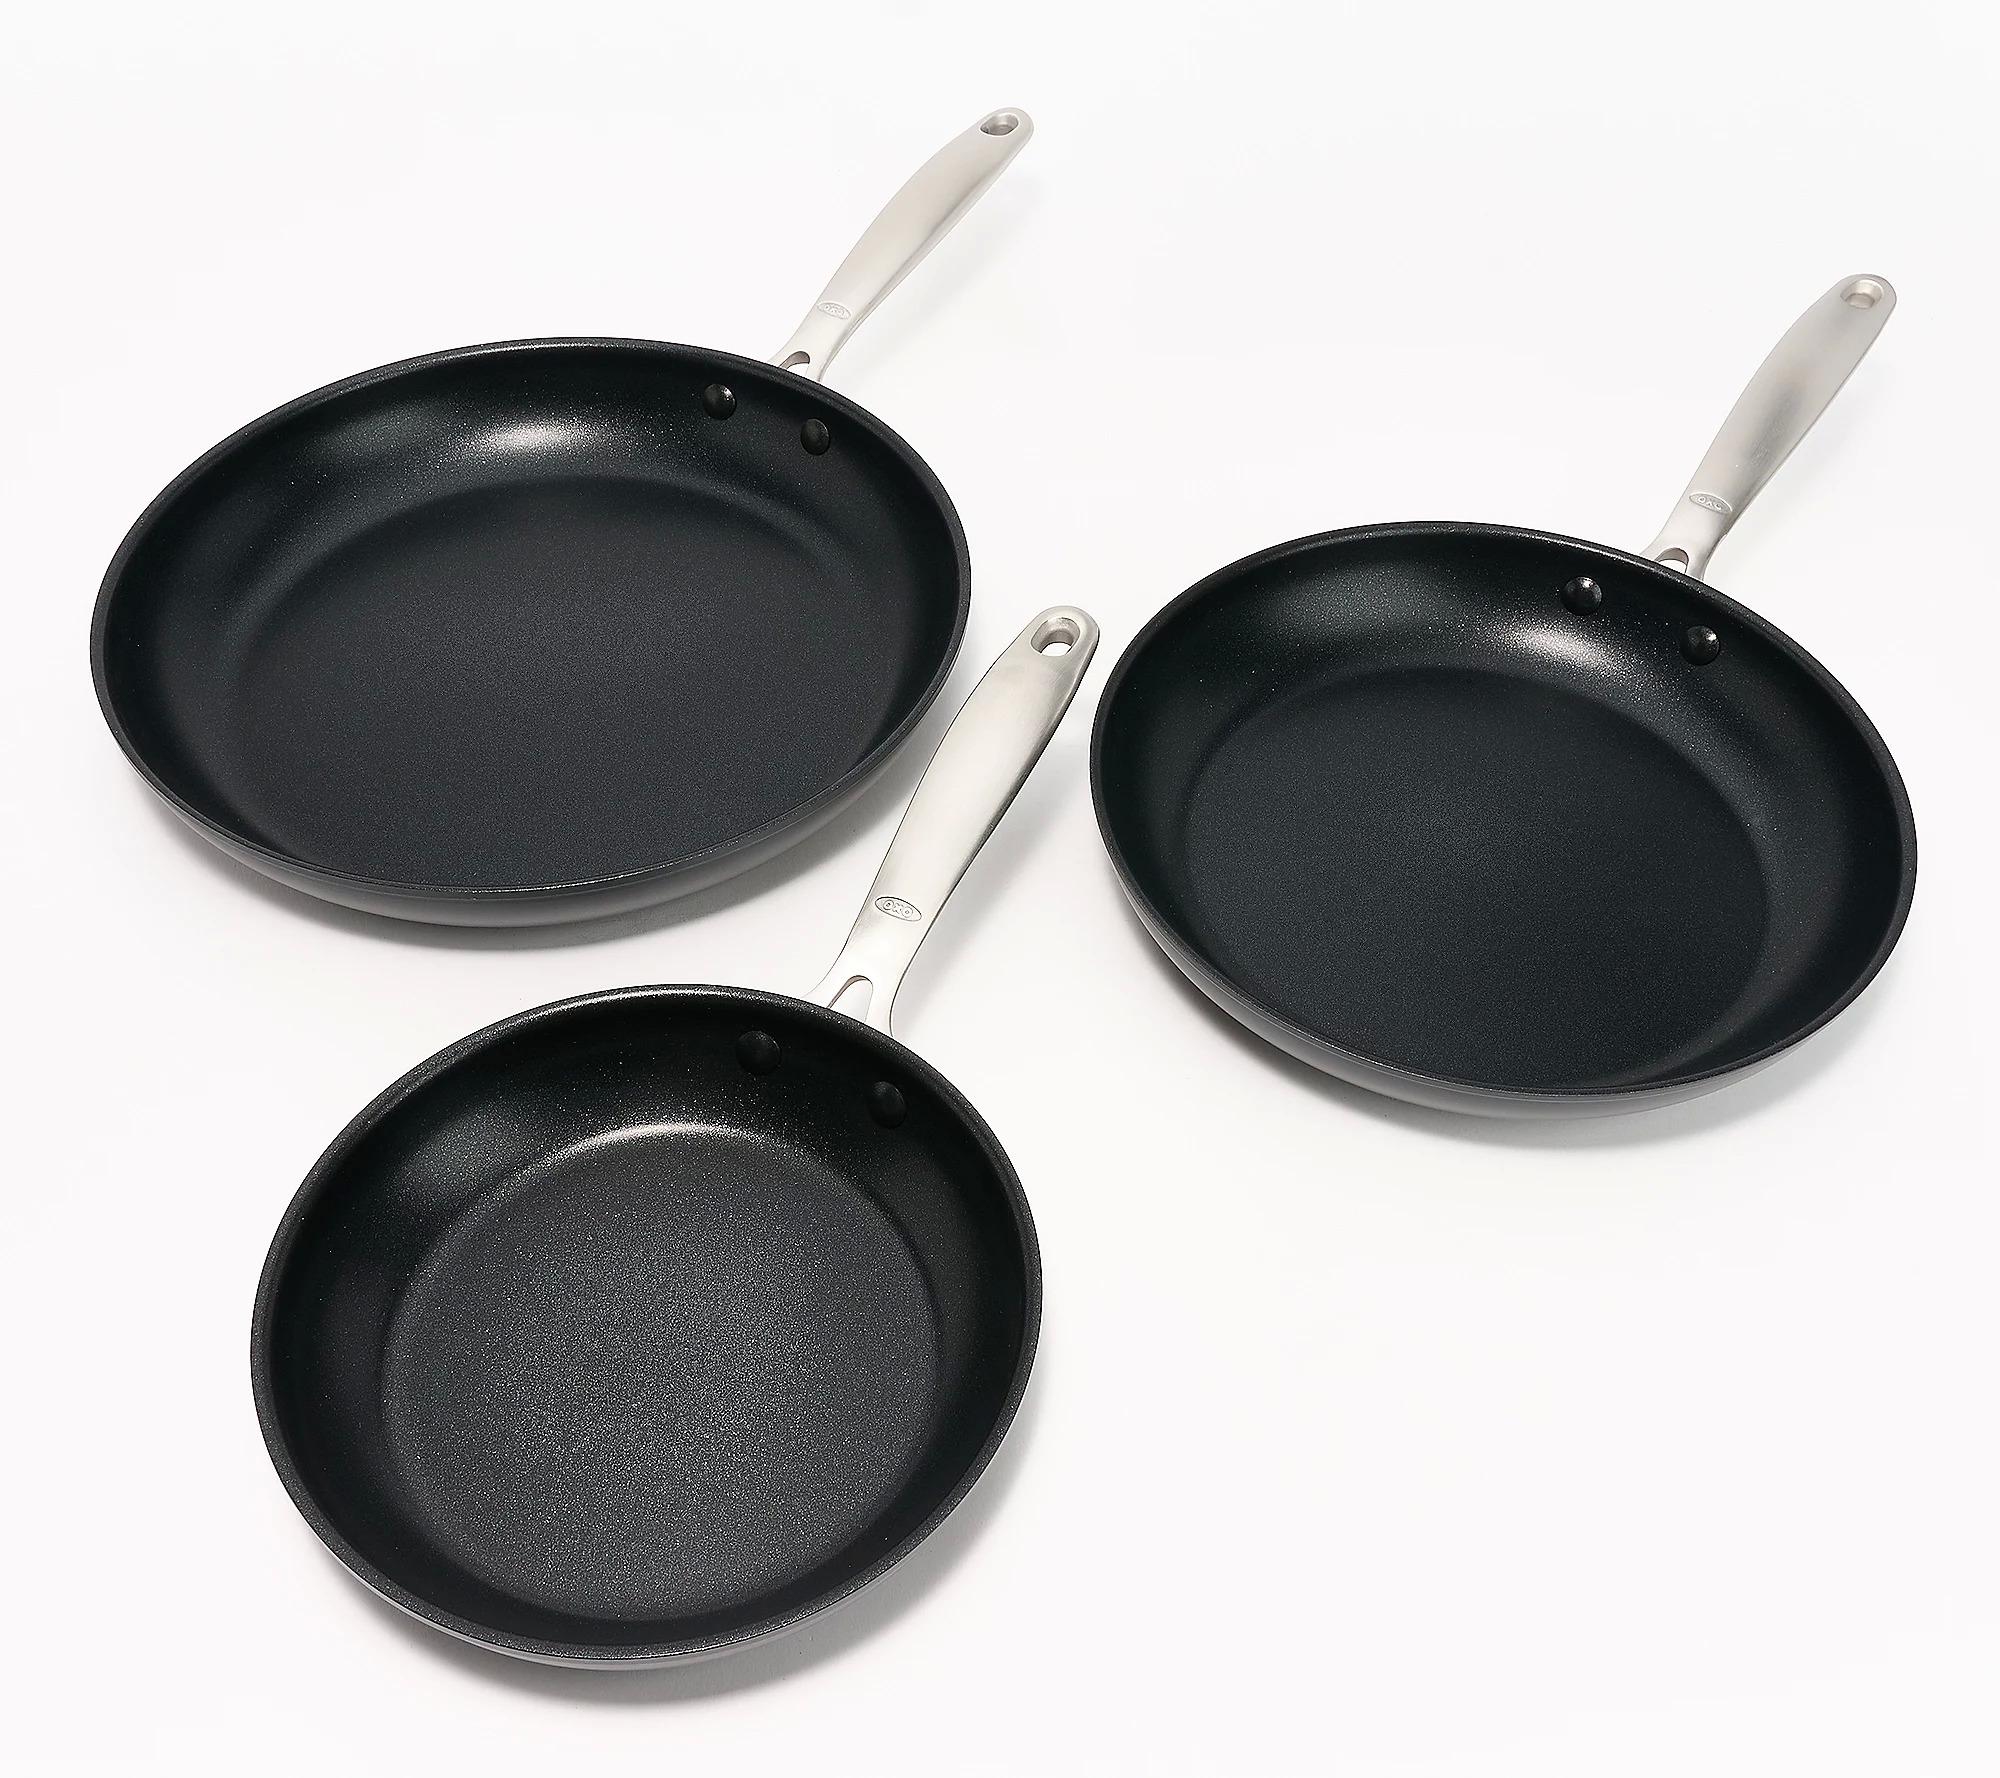 OXO Good Grips Pro 3-Piece Nonstick Hard Anodized Fry Pans for $39.99 Shipped